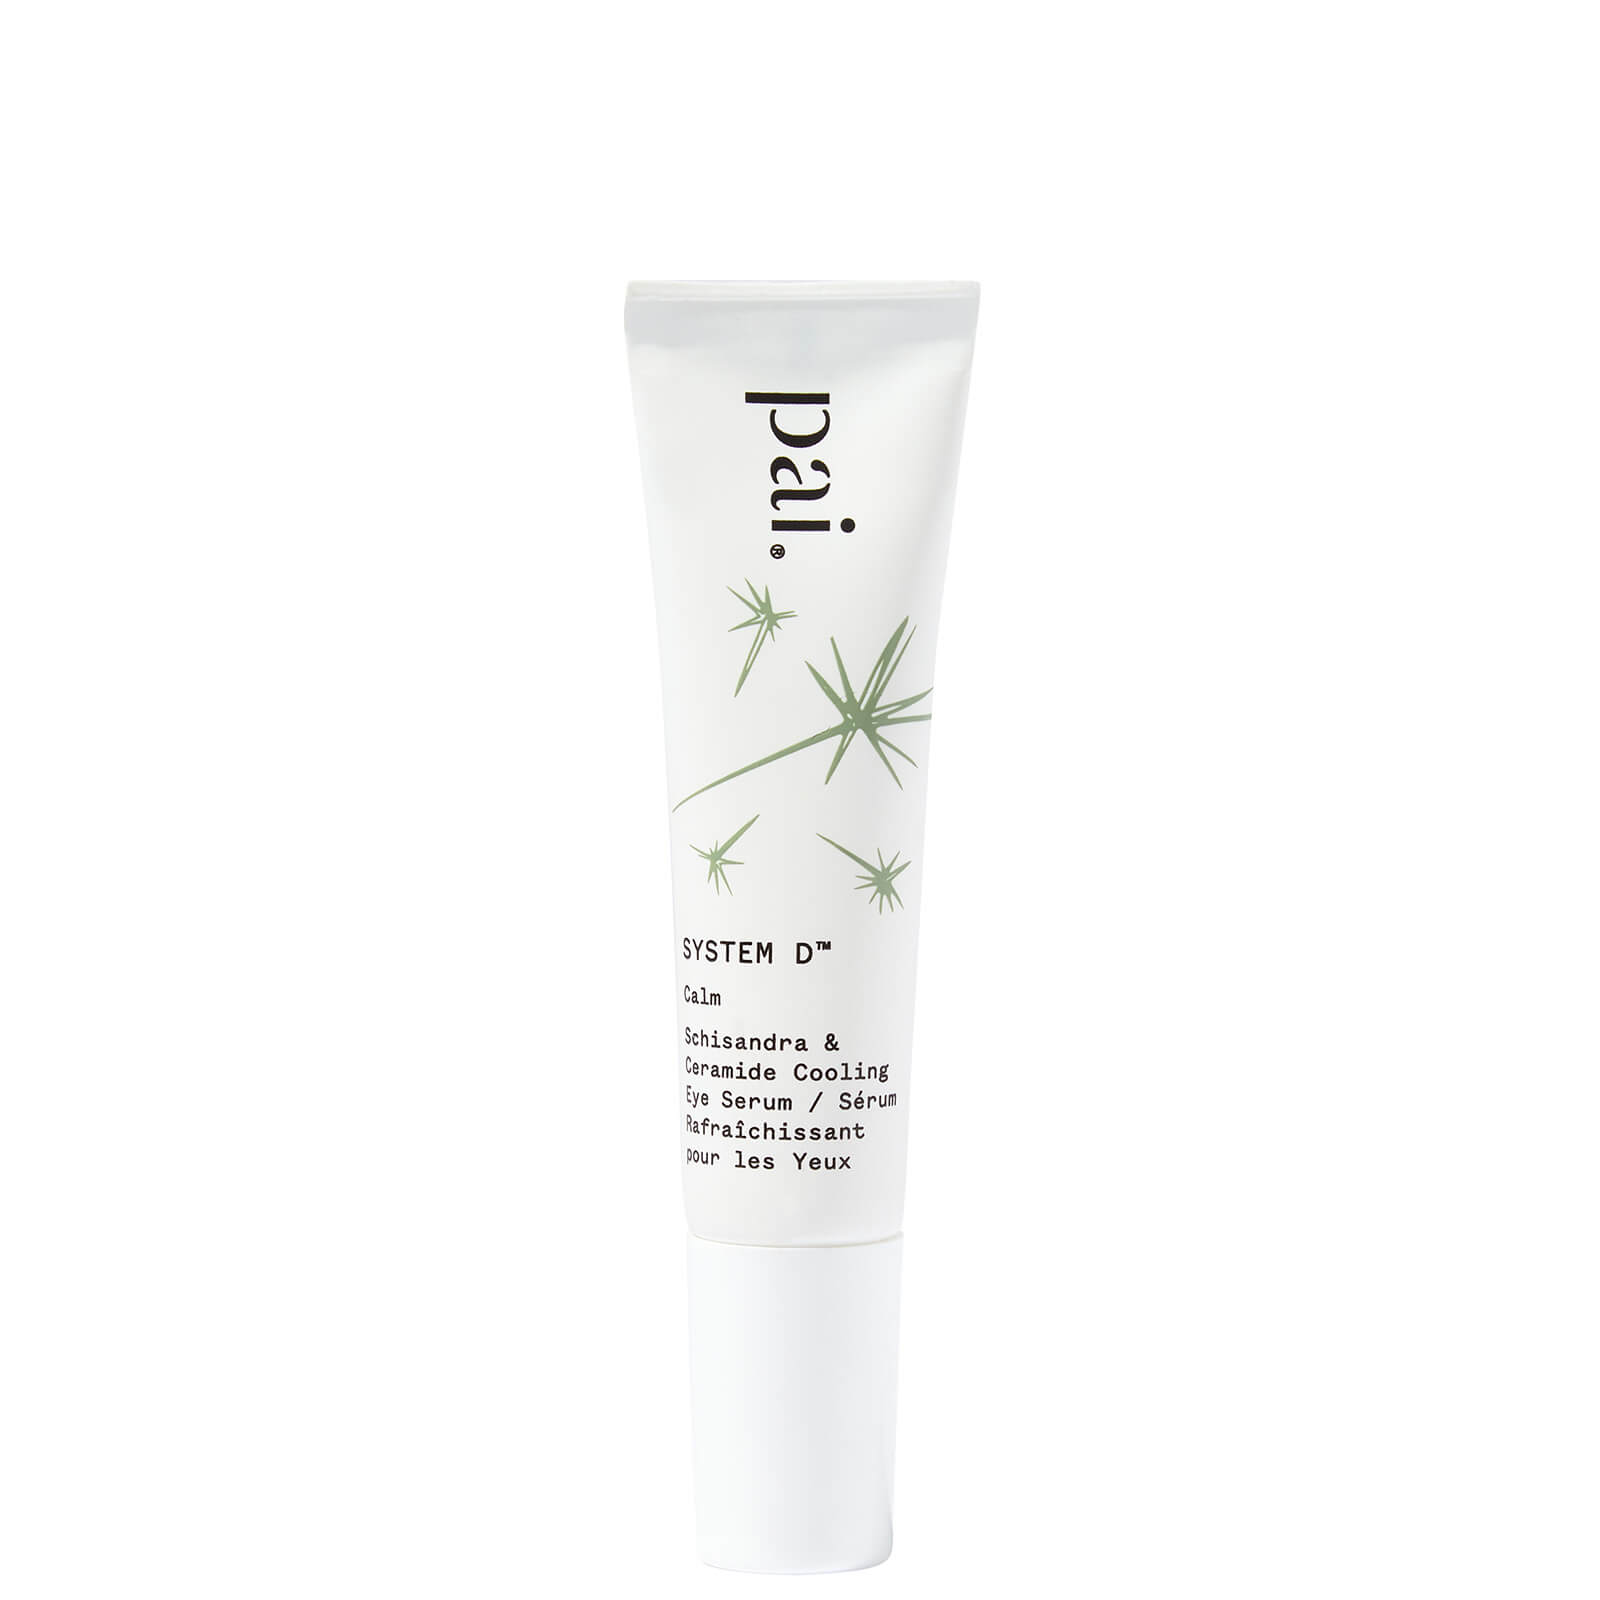 Image of Pai Skincare System D Schisandra and Ceramide Cooling Eye Serum 15ml